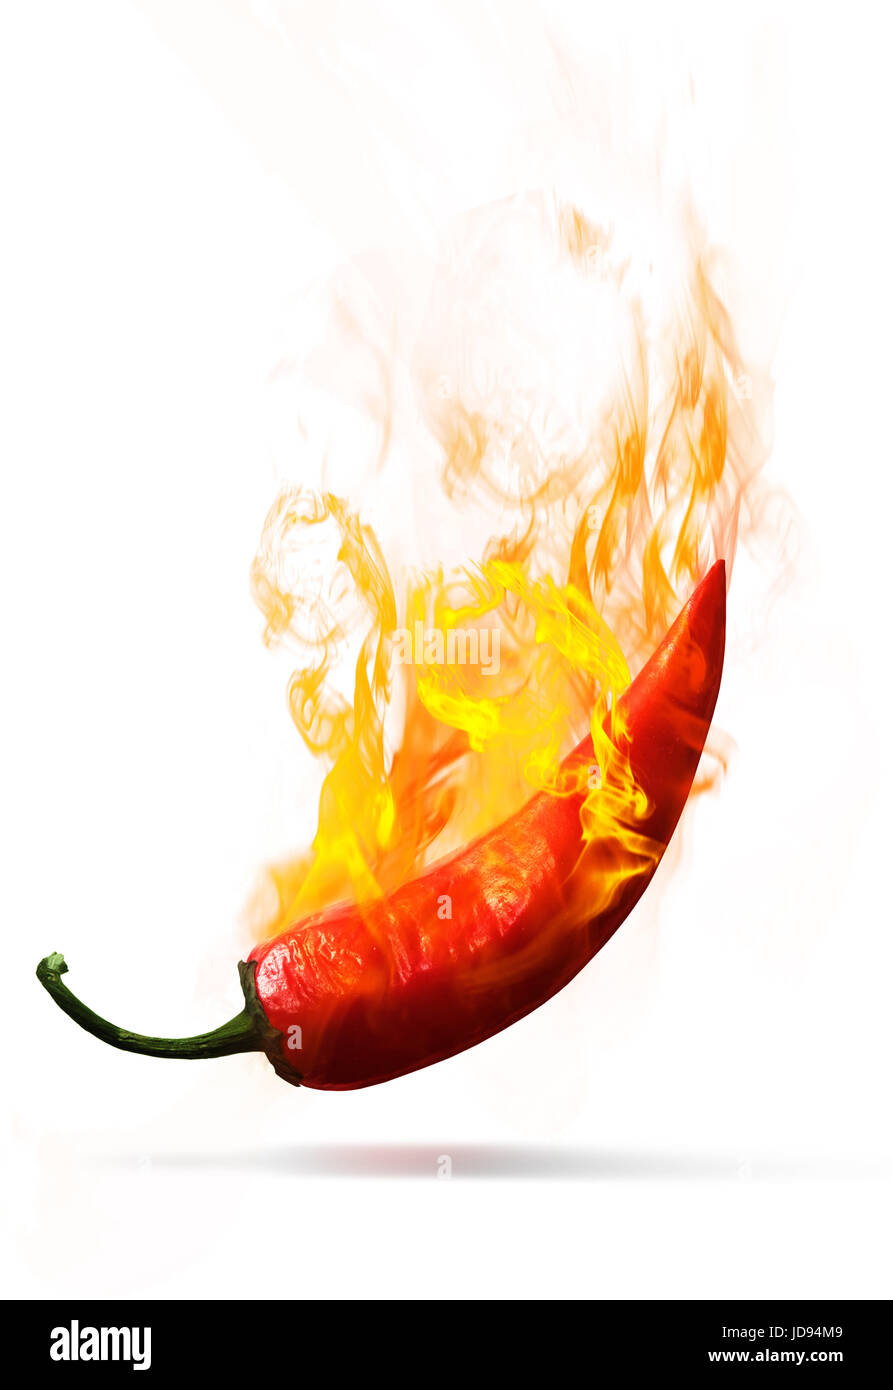 fiery red pepper on a white background Stock Photo